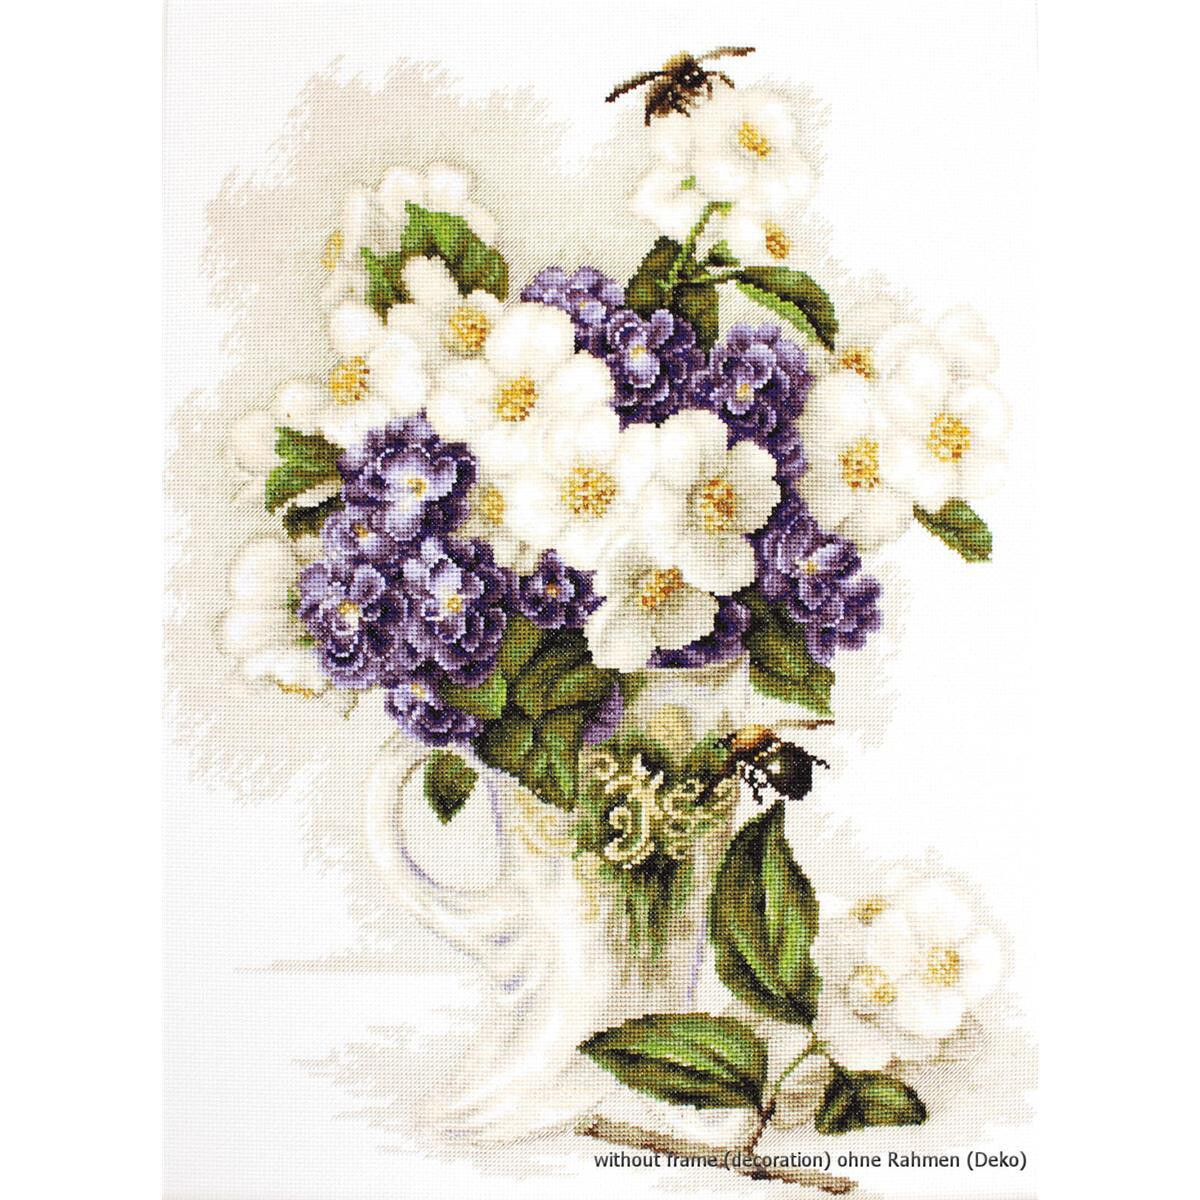 Luca-S counted Cross Stitch kit "Vase with...